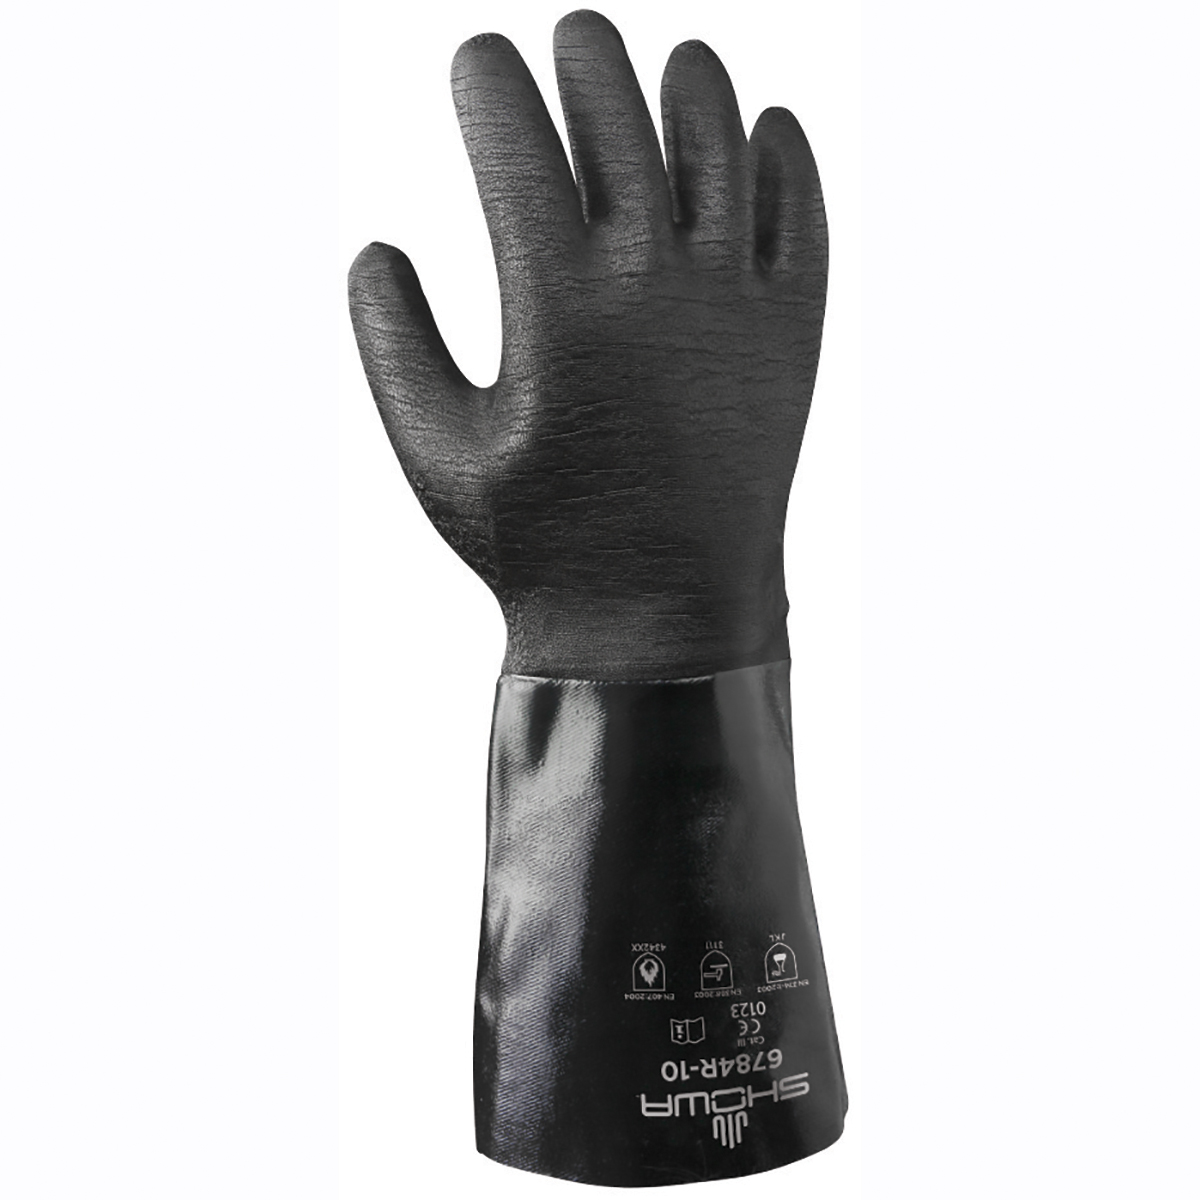 Chemical resistant neoprene fully coated heavyweight 14